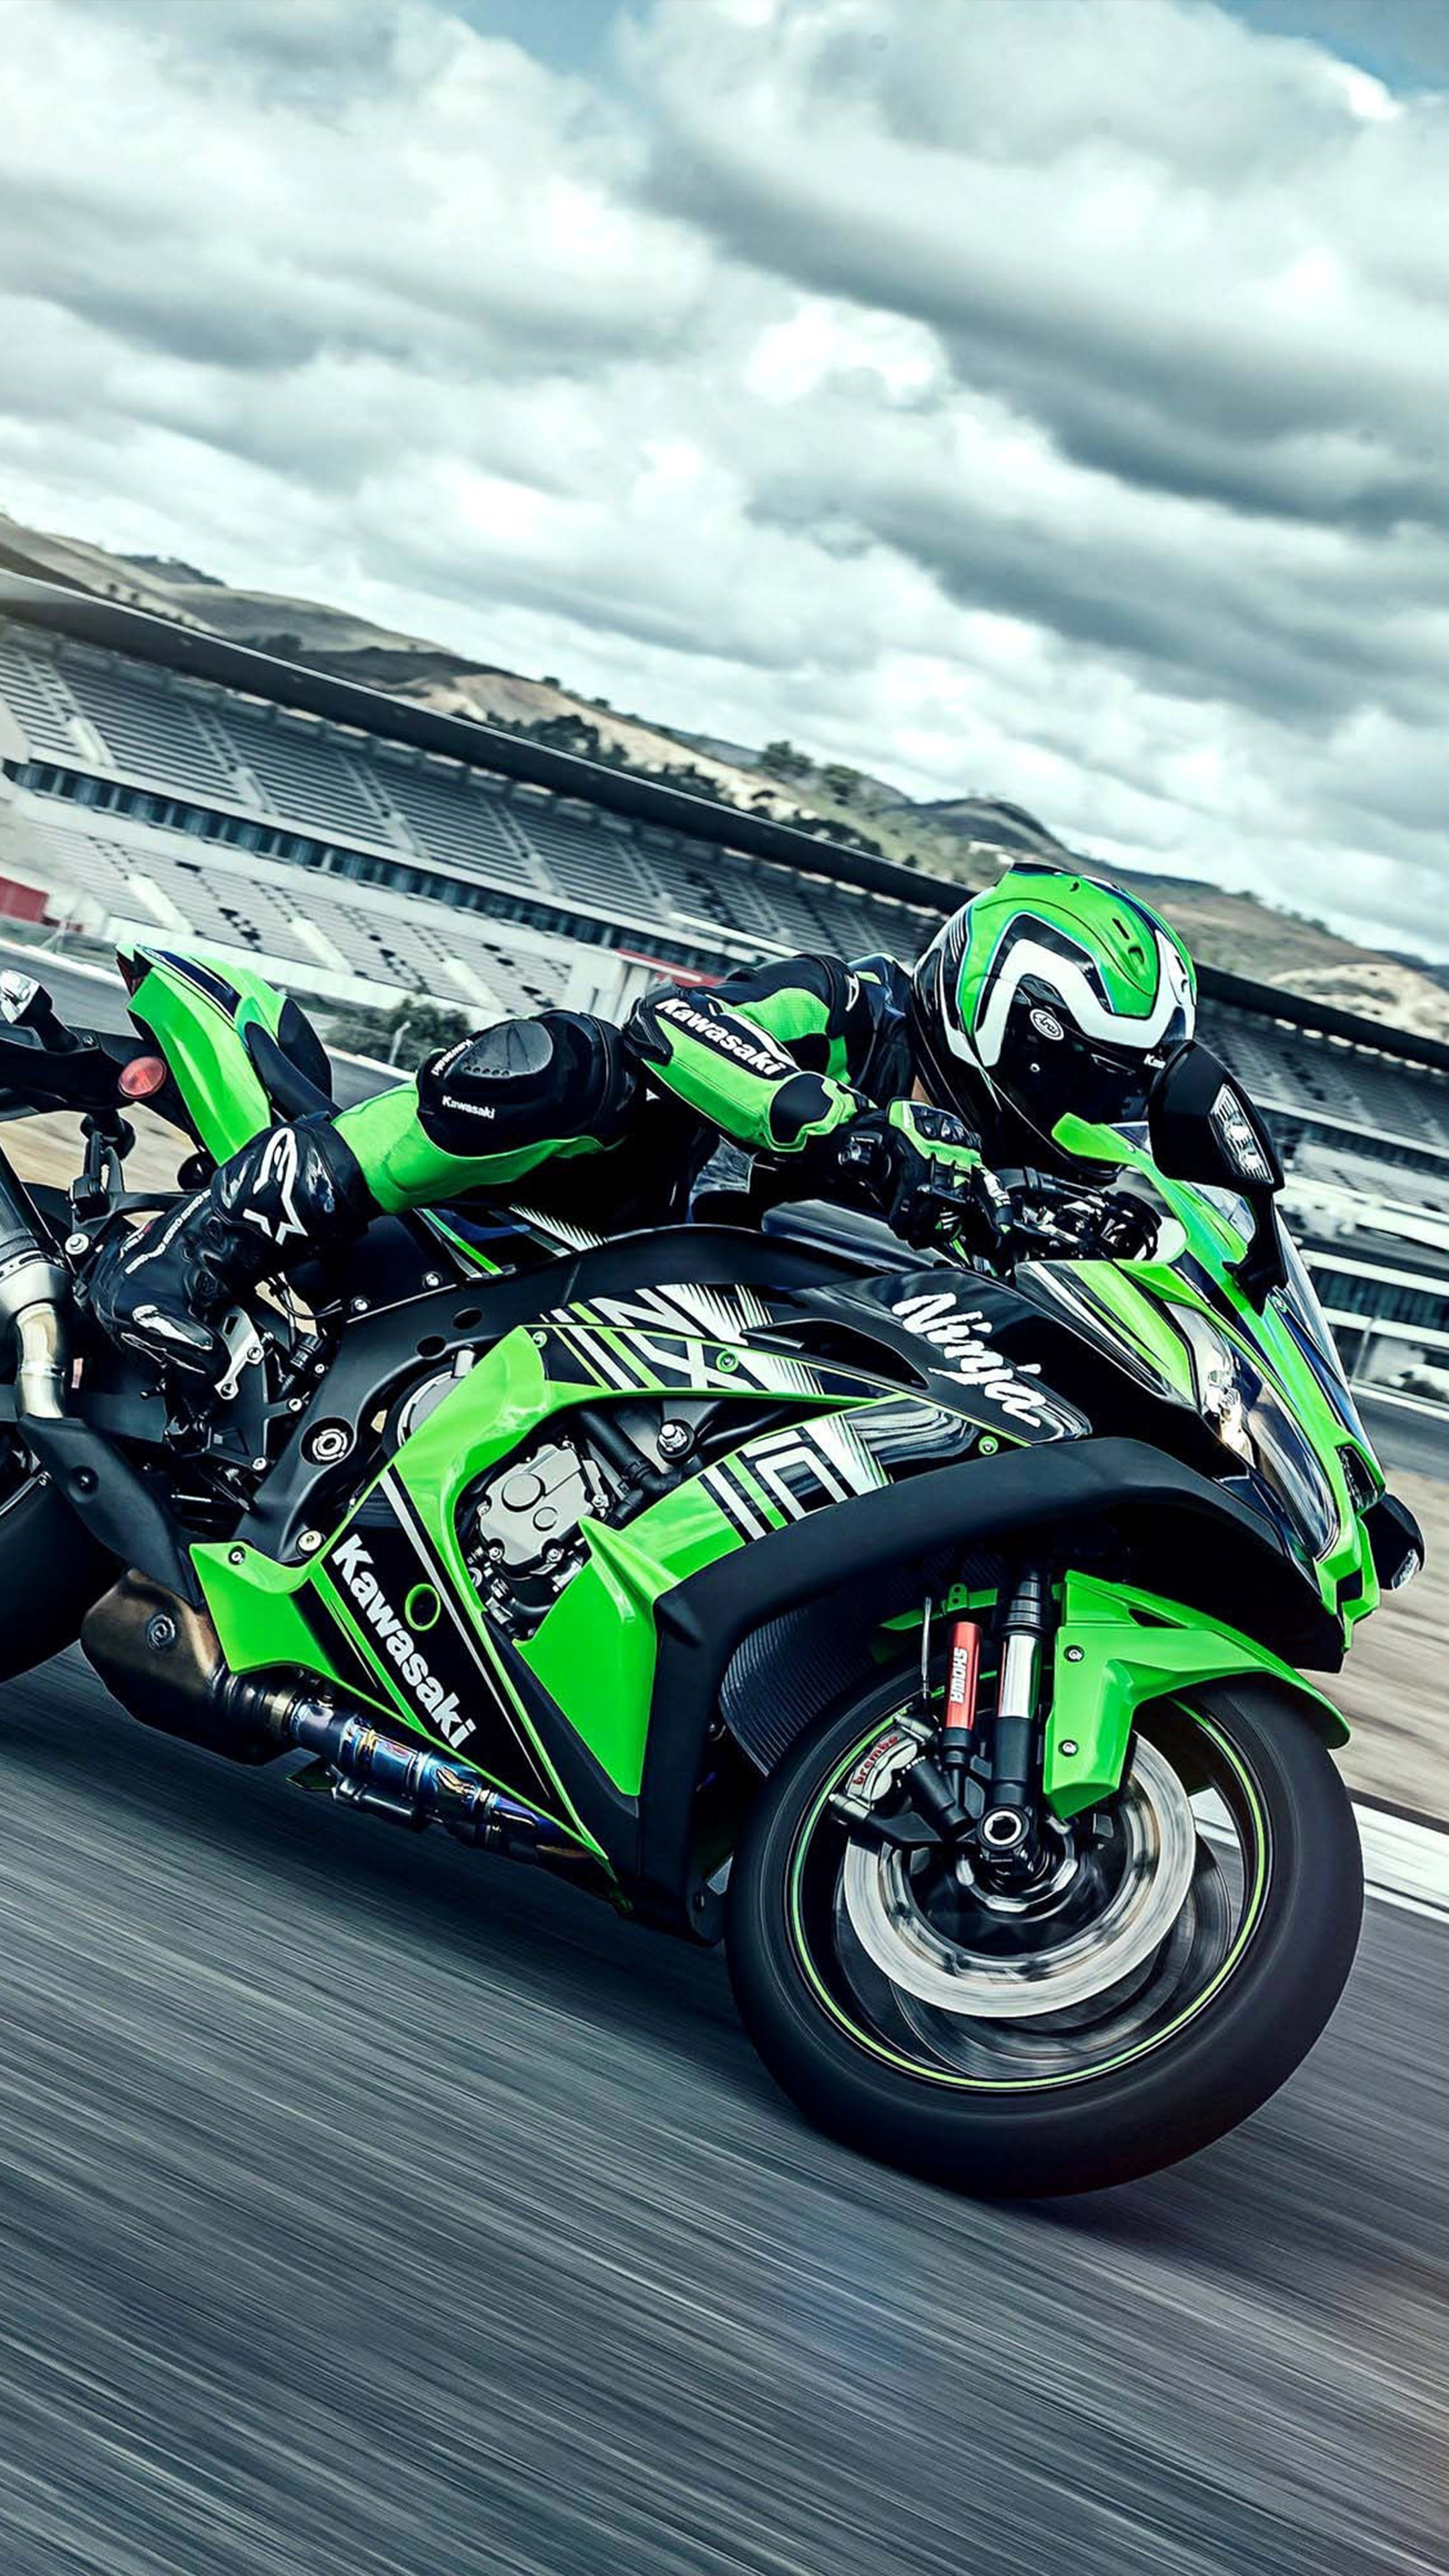 25 Outstanding 4k wallpaper zx10r You Can Use It For Free - Aesthetic Arena